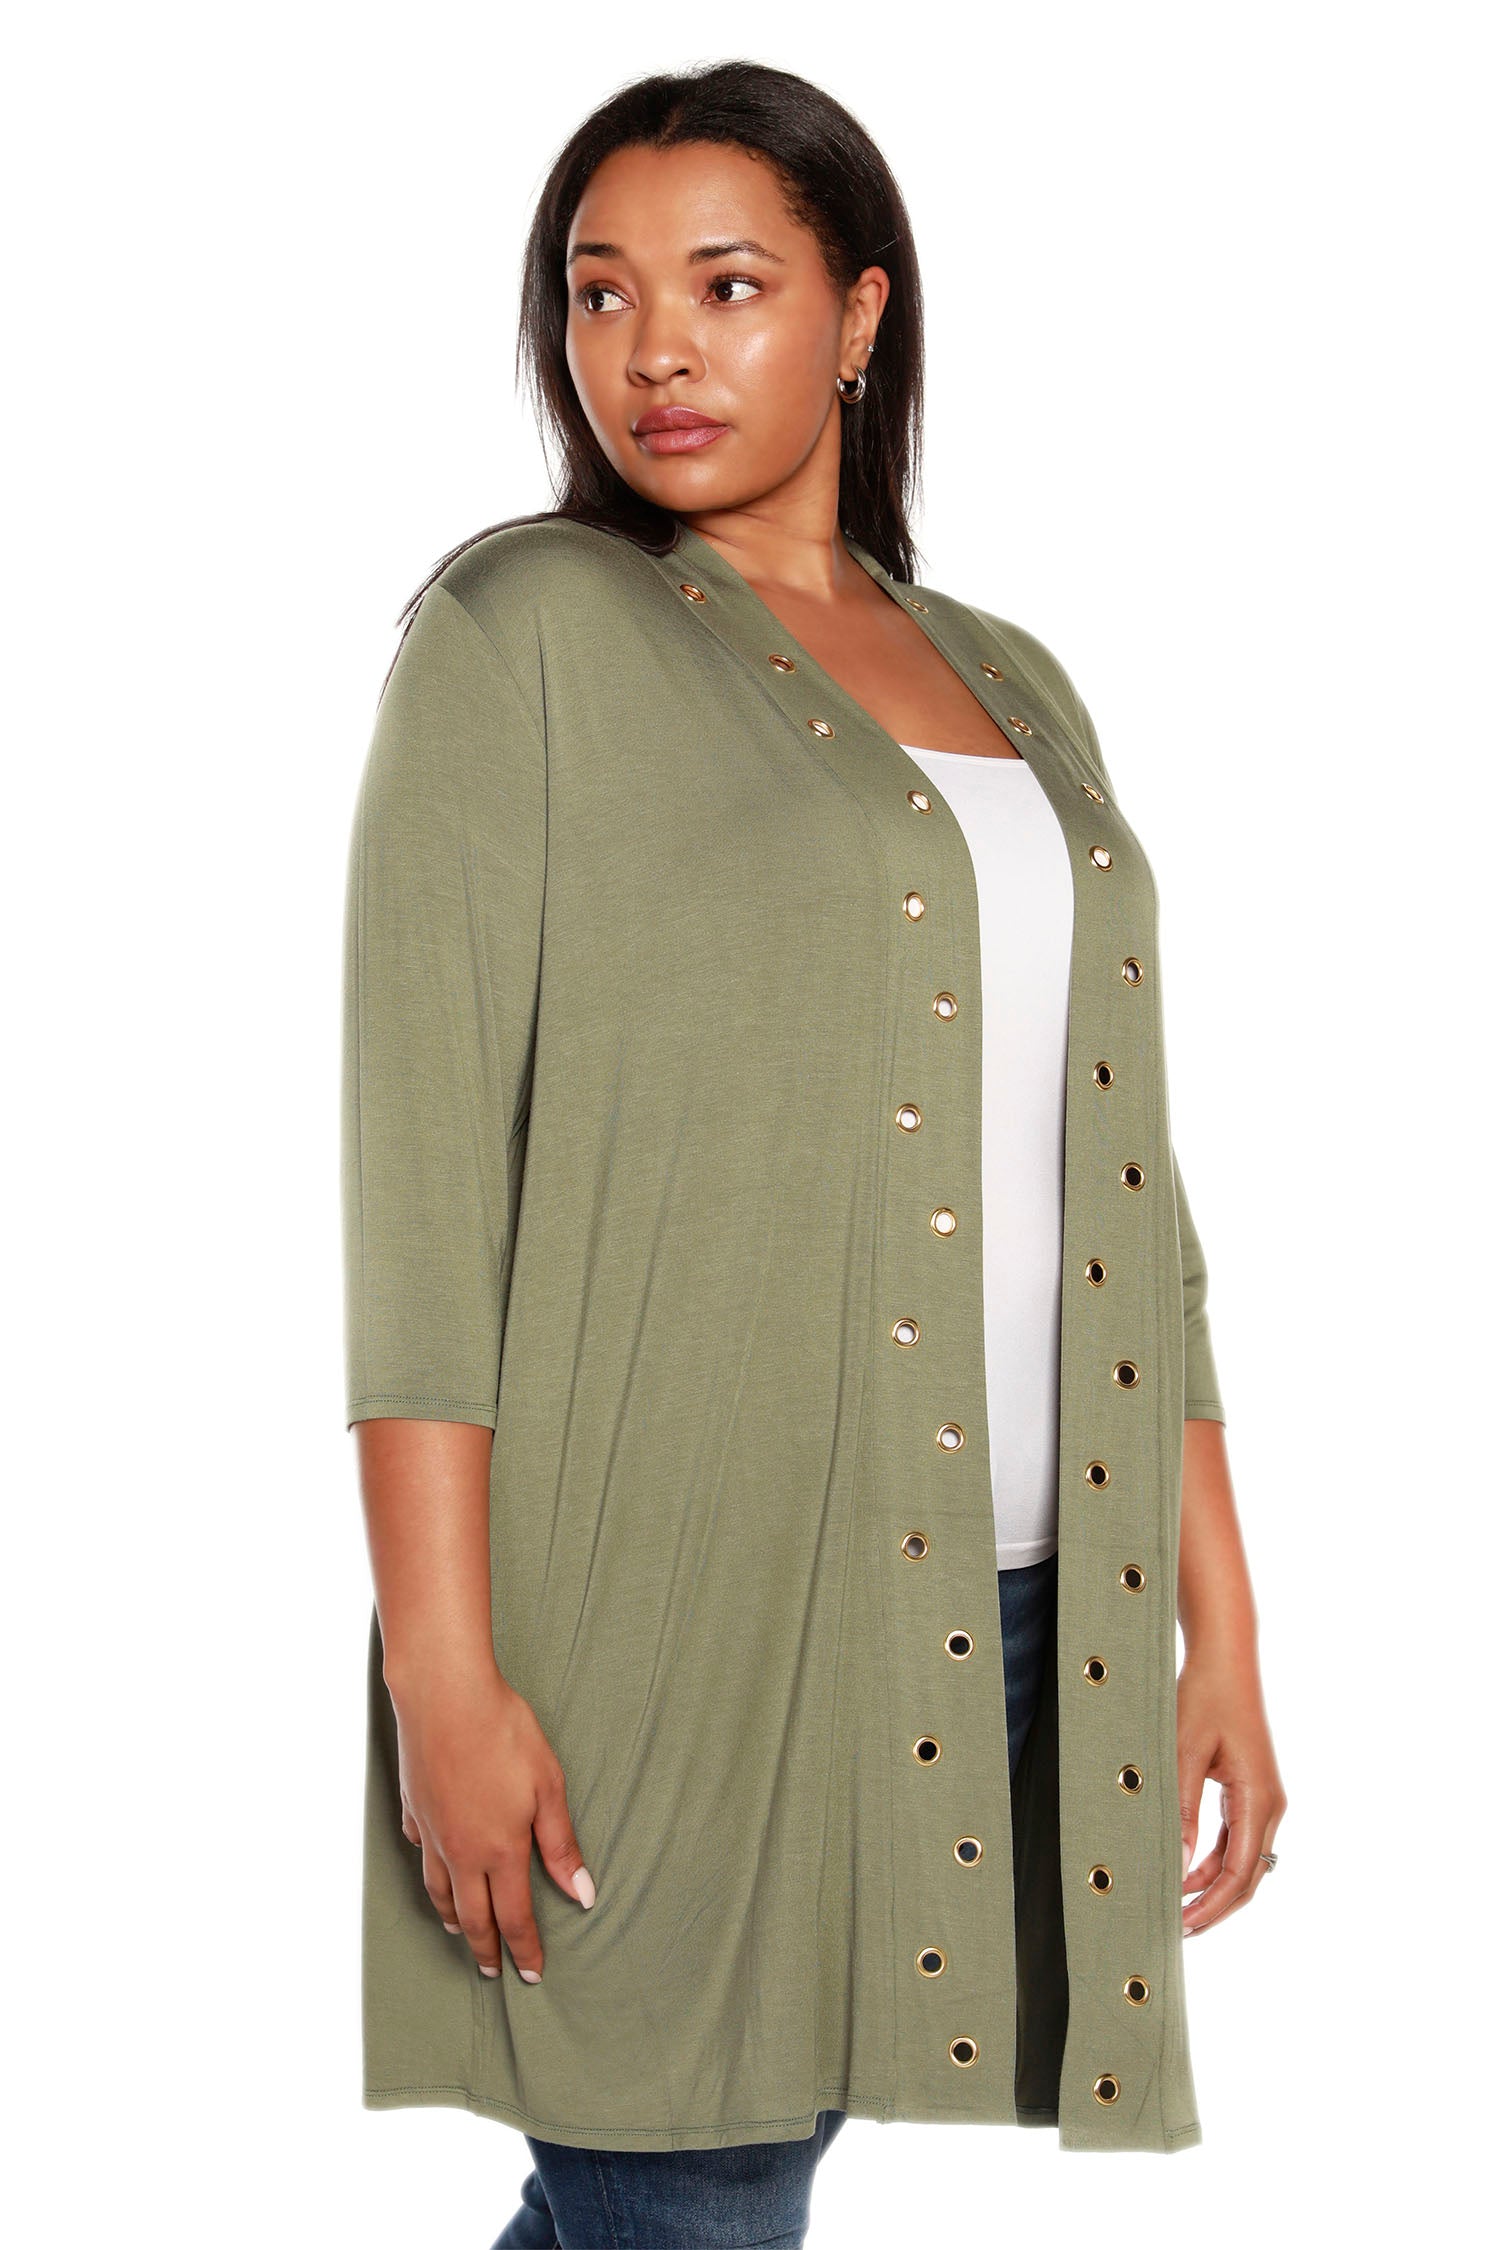 Women's 3/4 Sleeve Mid-Thigh Jersey Cardigan with Gold Grommet Trim | Curvy